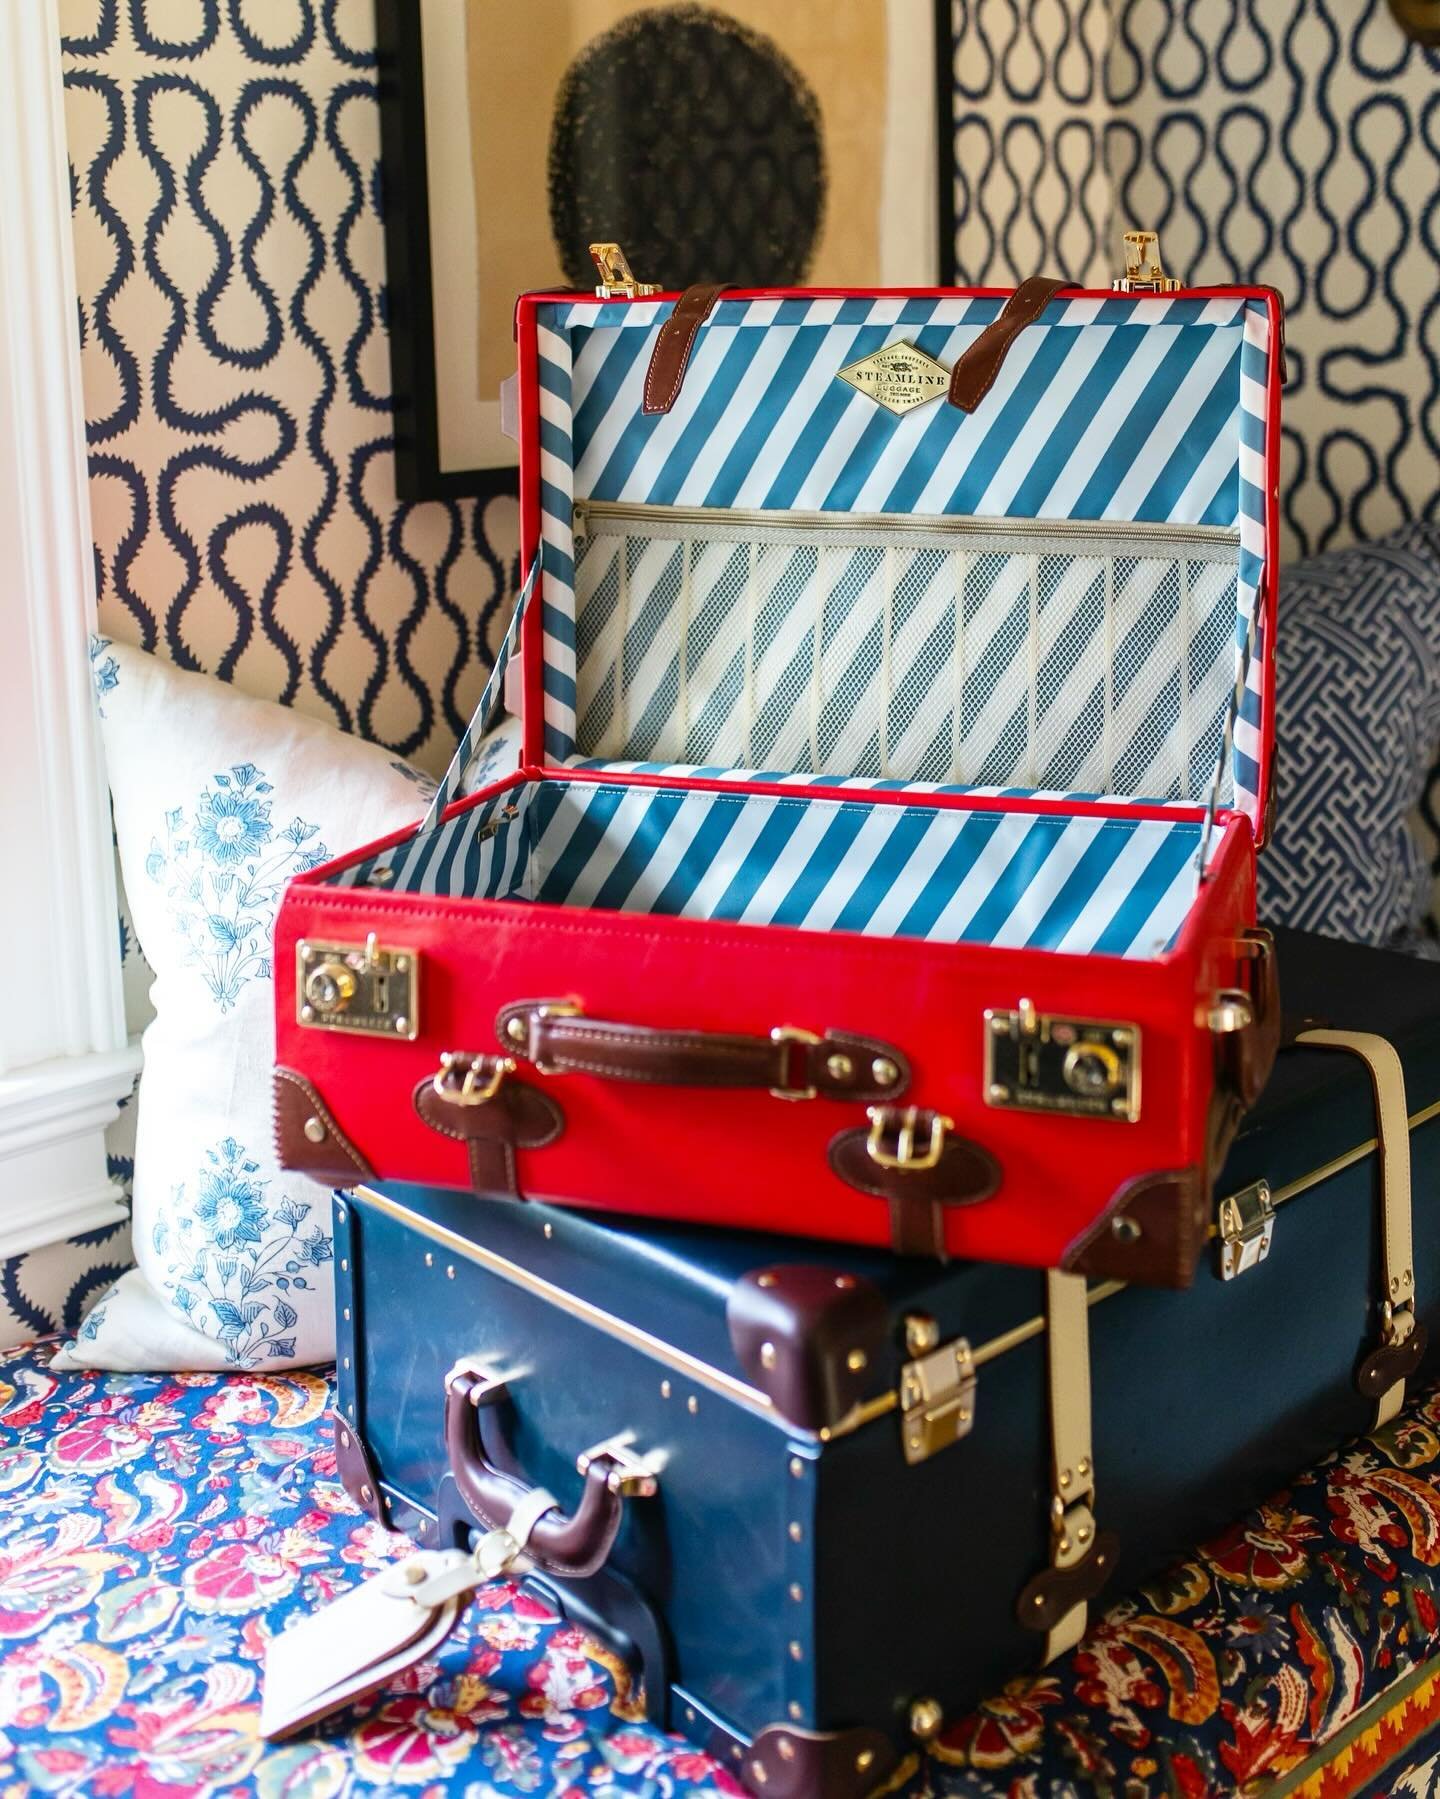 &lsquo;Tis the season for travel, but make it extra chic with our favorite @steamlineluggage! Psst up to 40% off this weekend. 🎈 Link in our profile for all of the details. 📷 @jessica_amerson #pencilandpapercotravel #luggage gifted